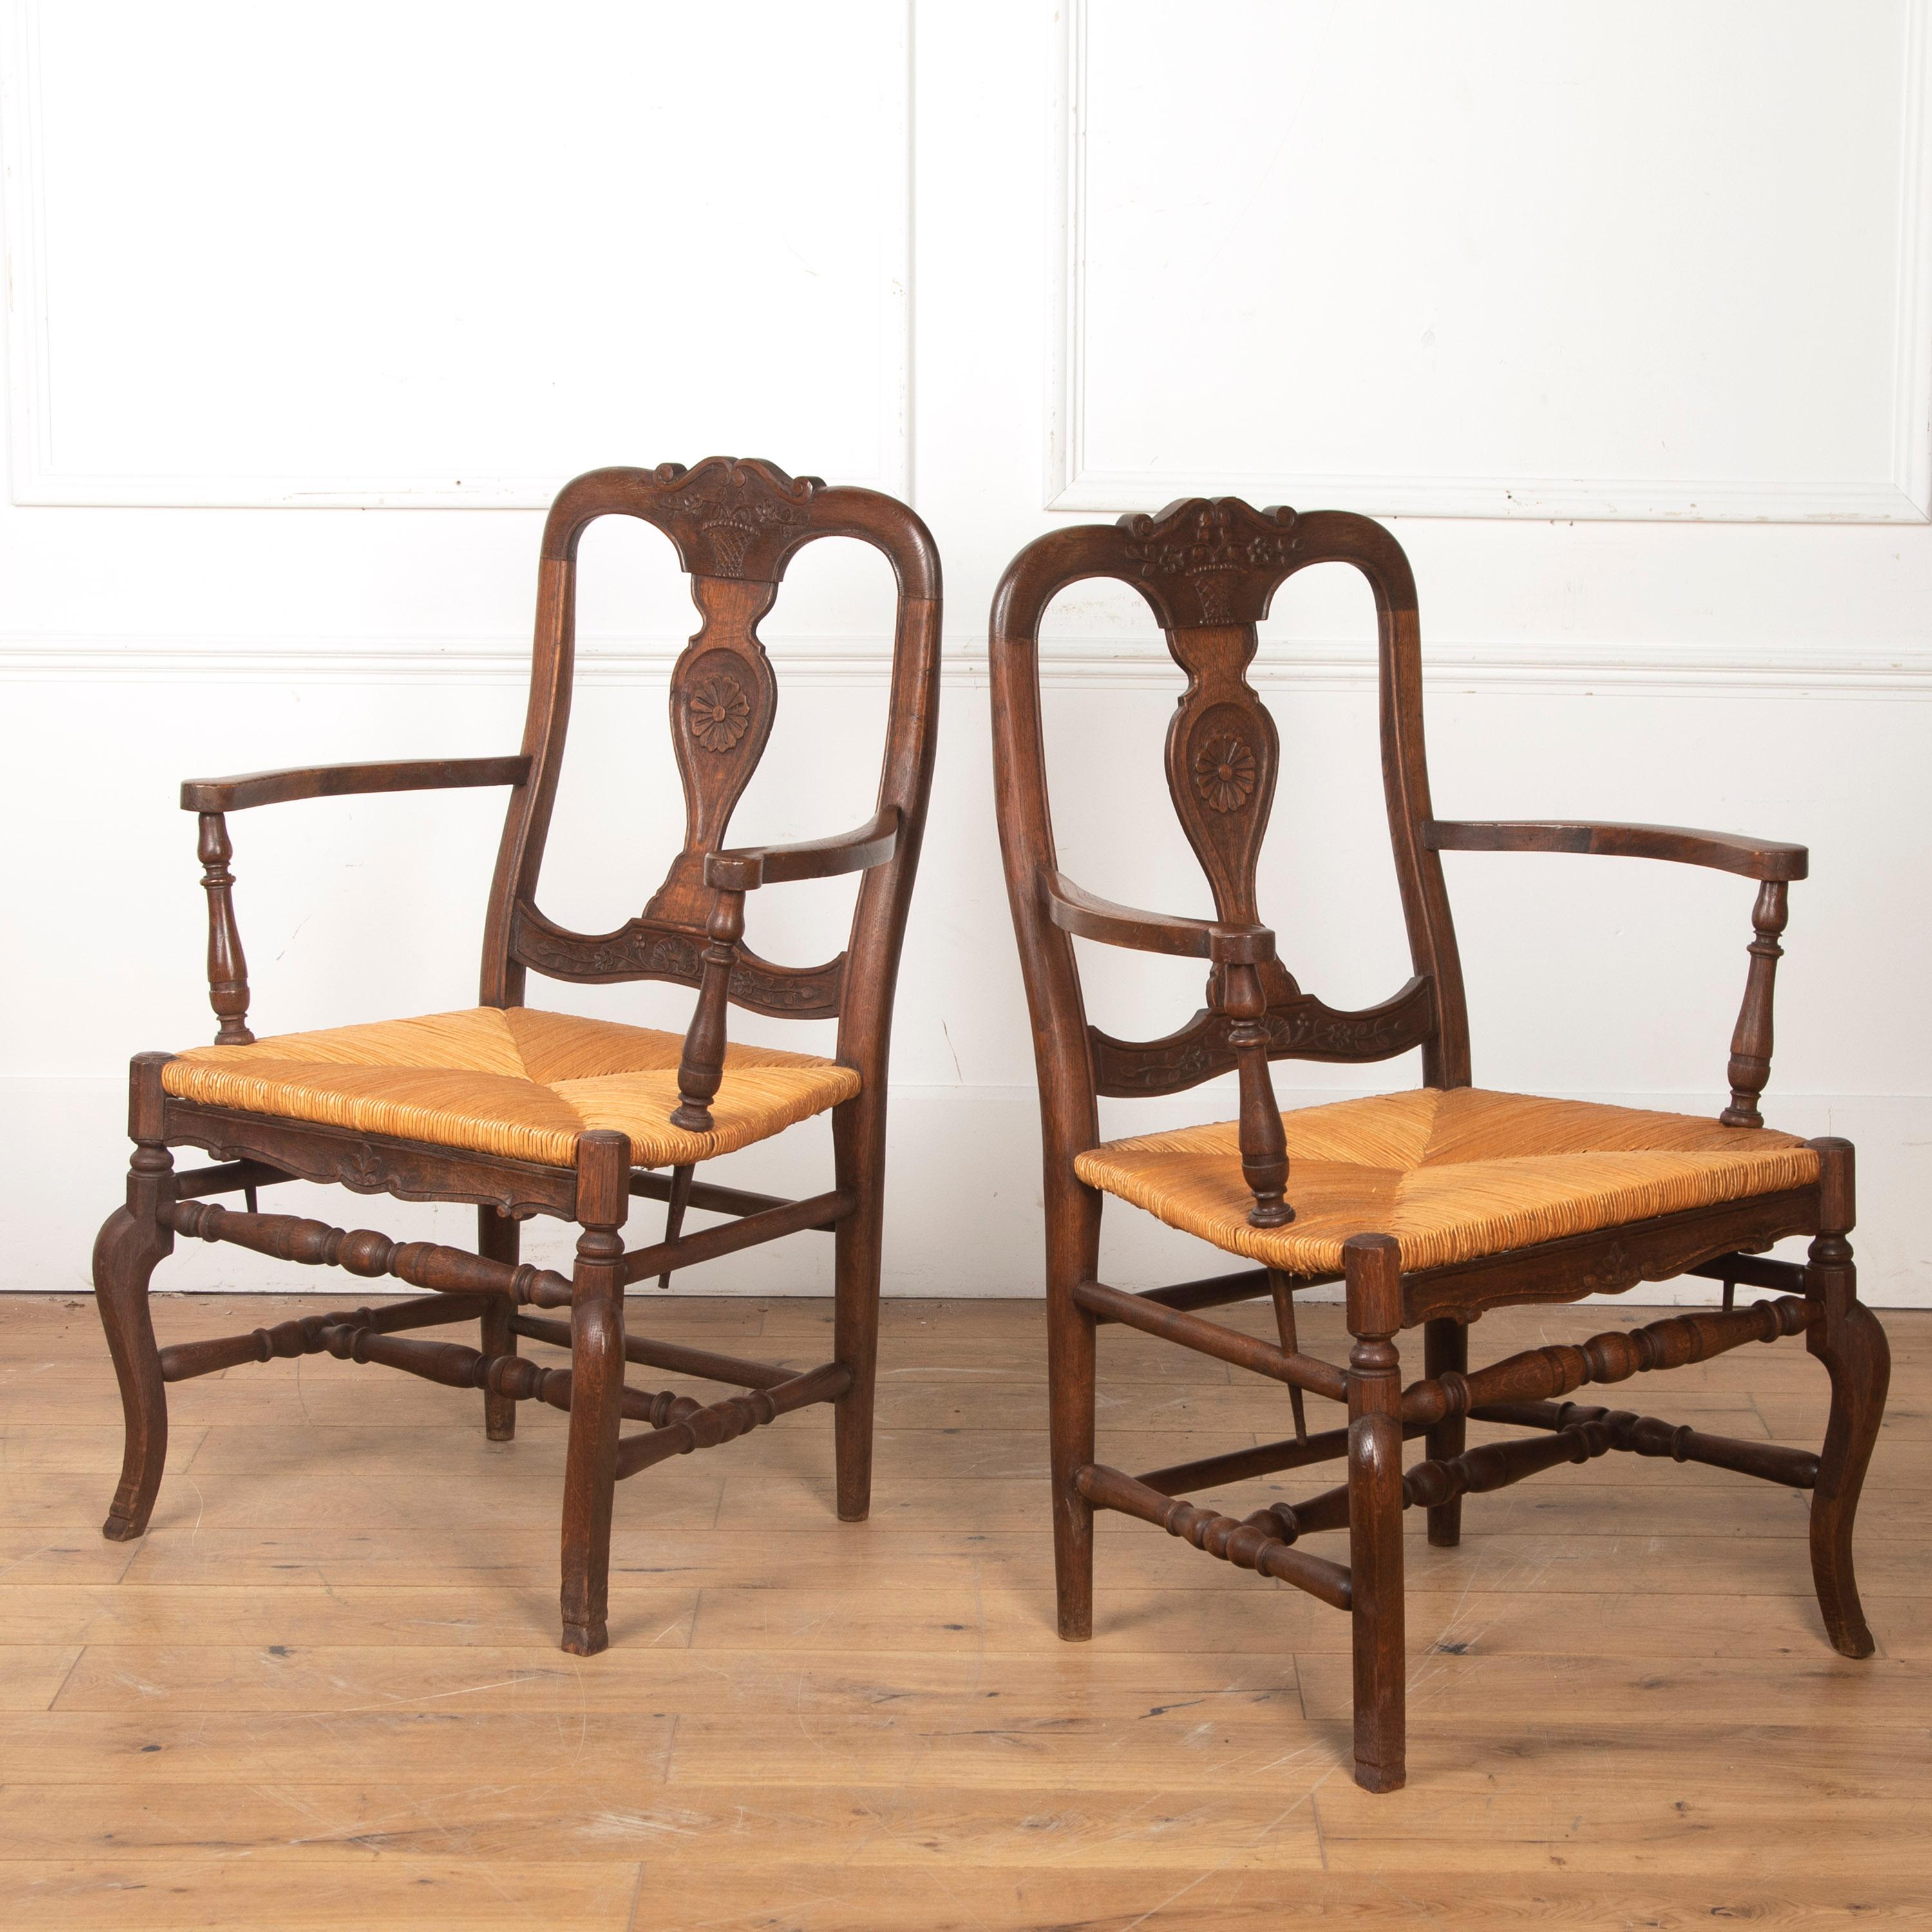 Pair of Country Carver Chairs 1